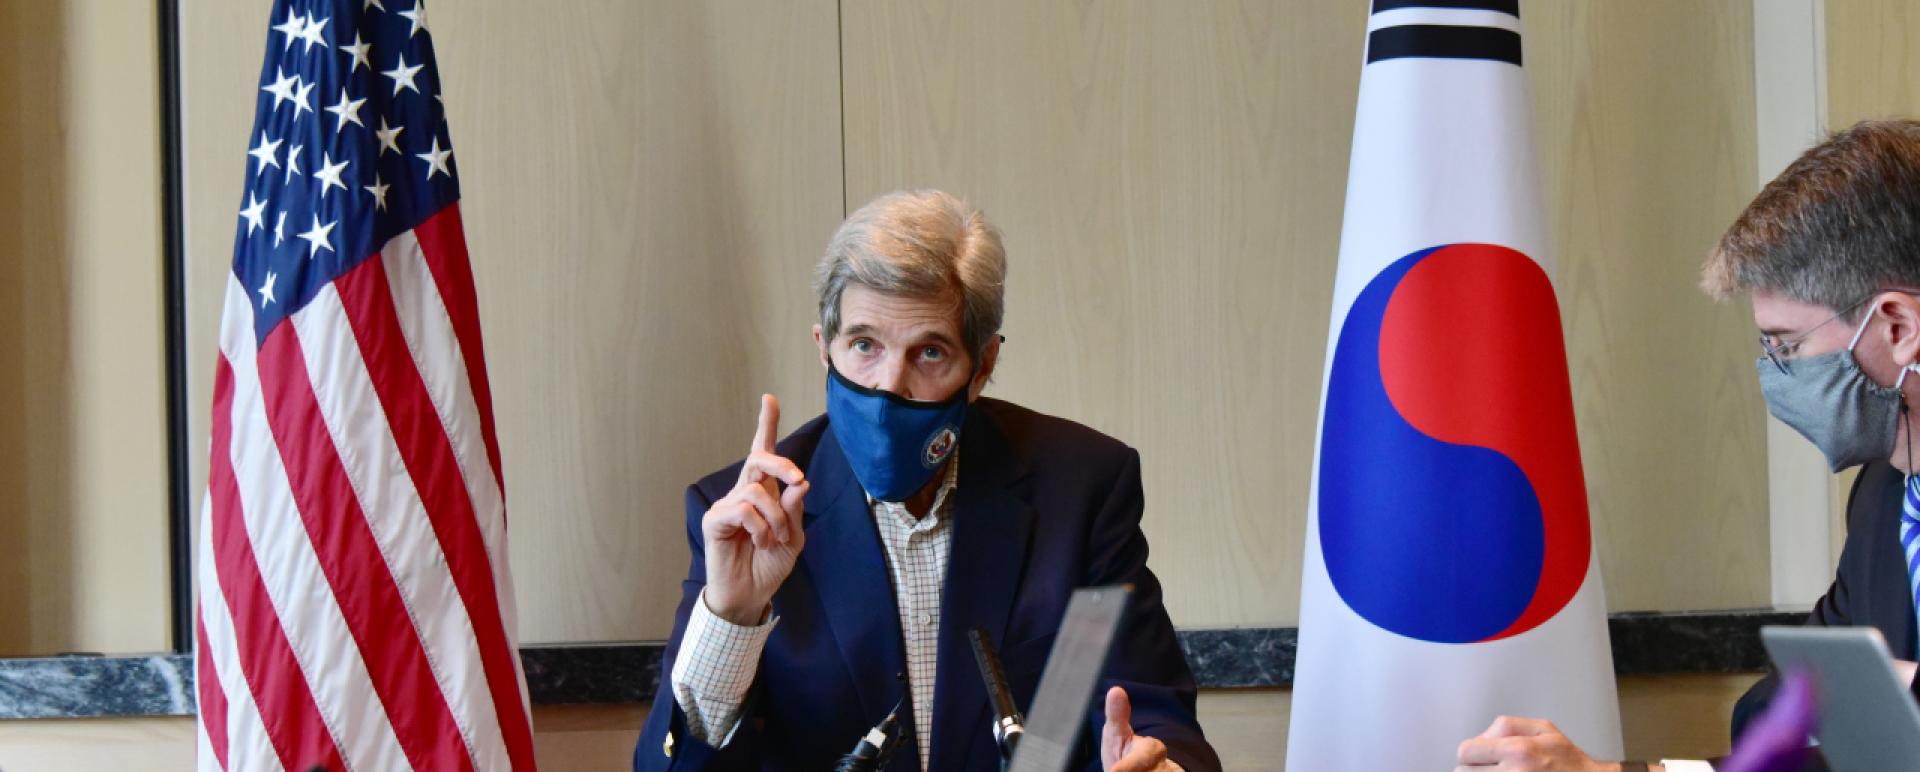 US special presidential envoy for climate John Kerry speaks during a roundtable meeting in Seoul on Sunday. (US Embassy in South Korea)